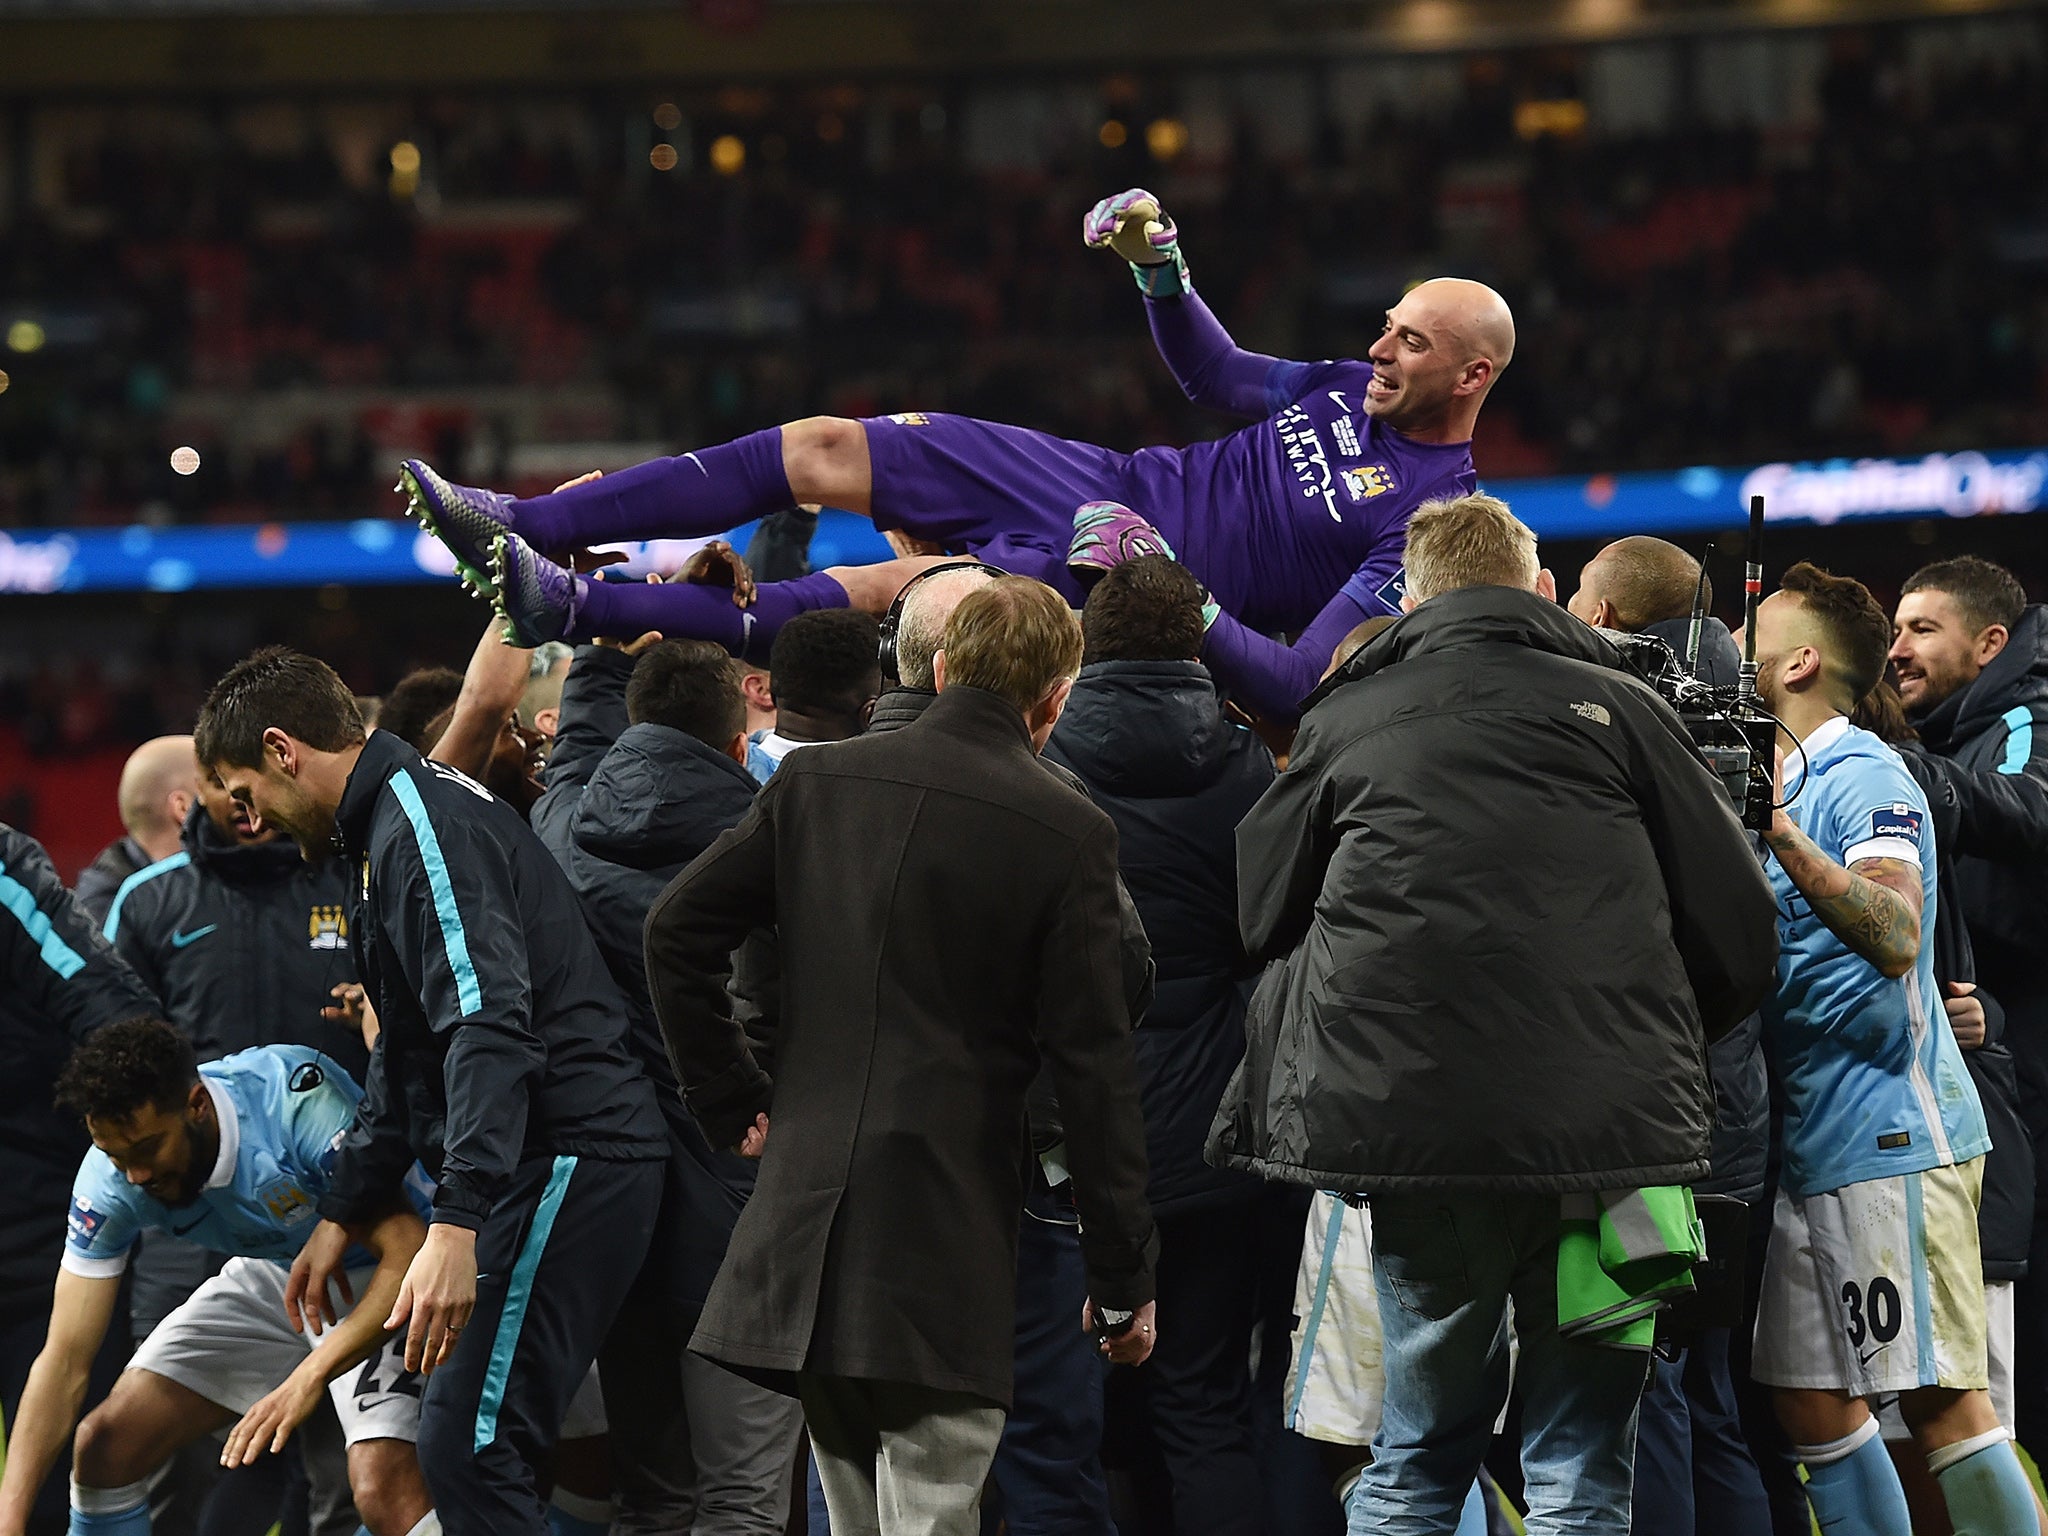 Manchester City's goalkeeper Willy Caballero is congratulated on his performance